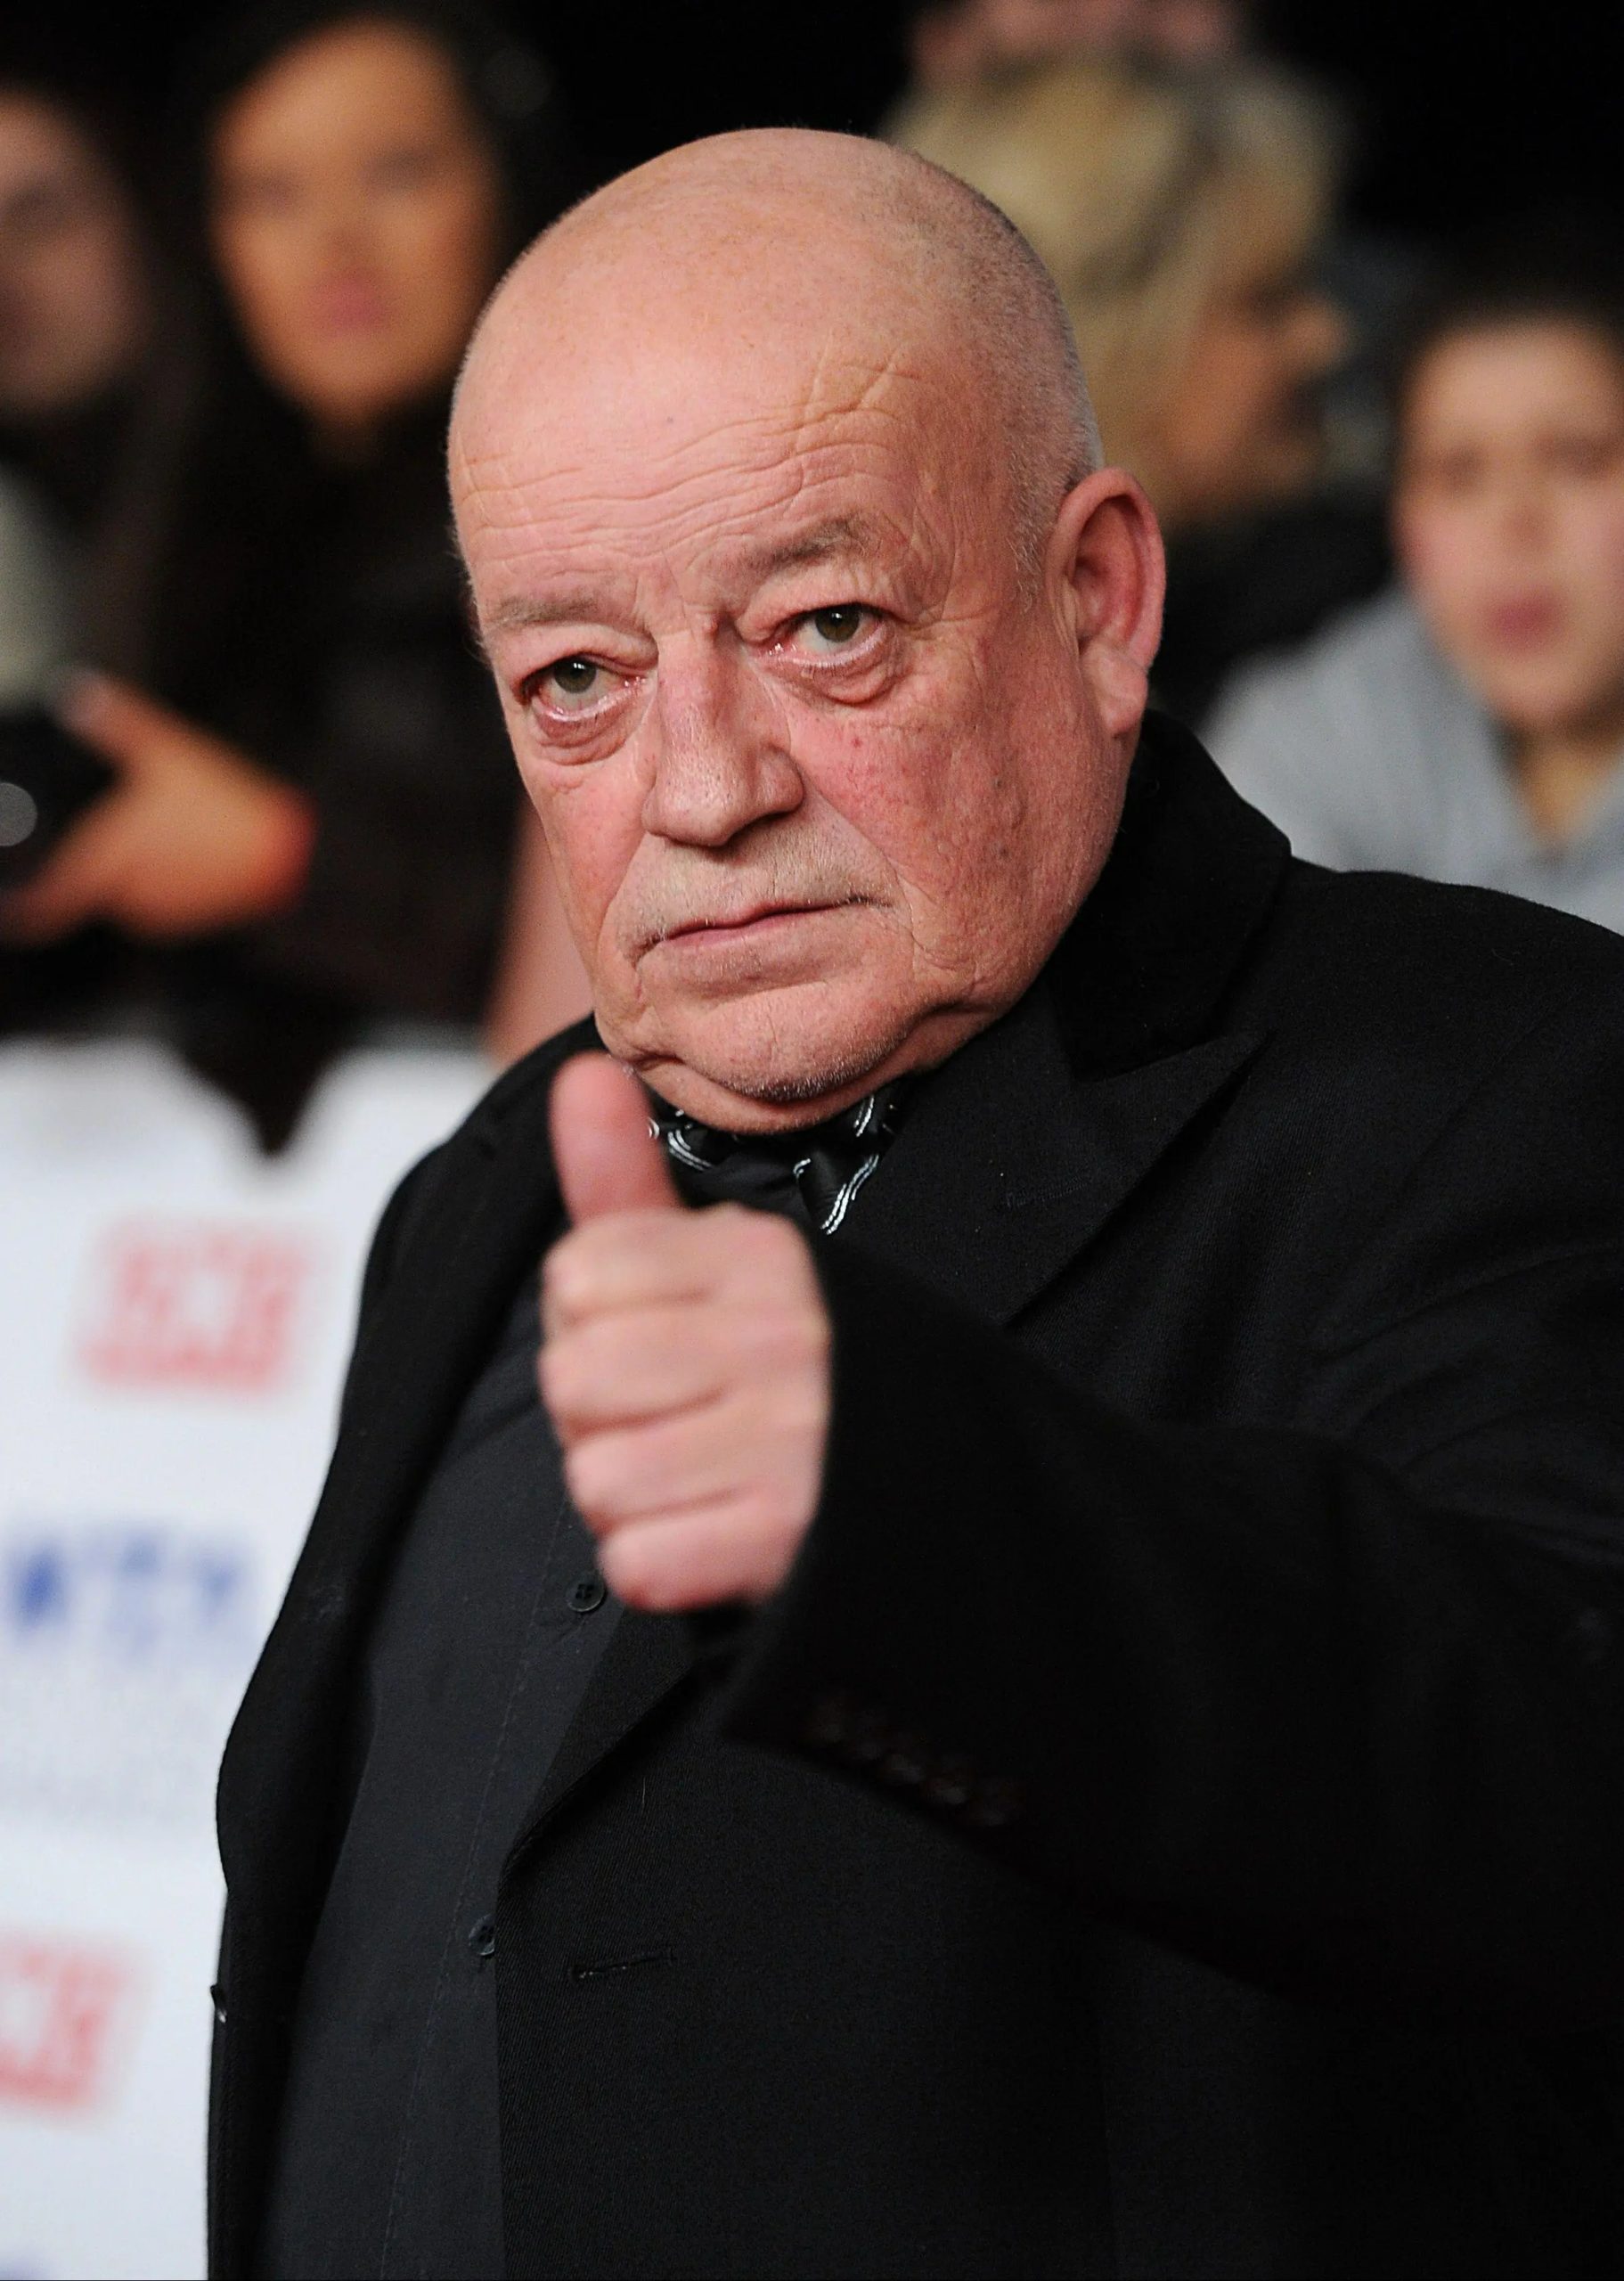 After followers became concerned over a Twitter tribute for Tim Healy, the scam was debunked